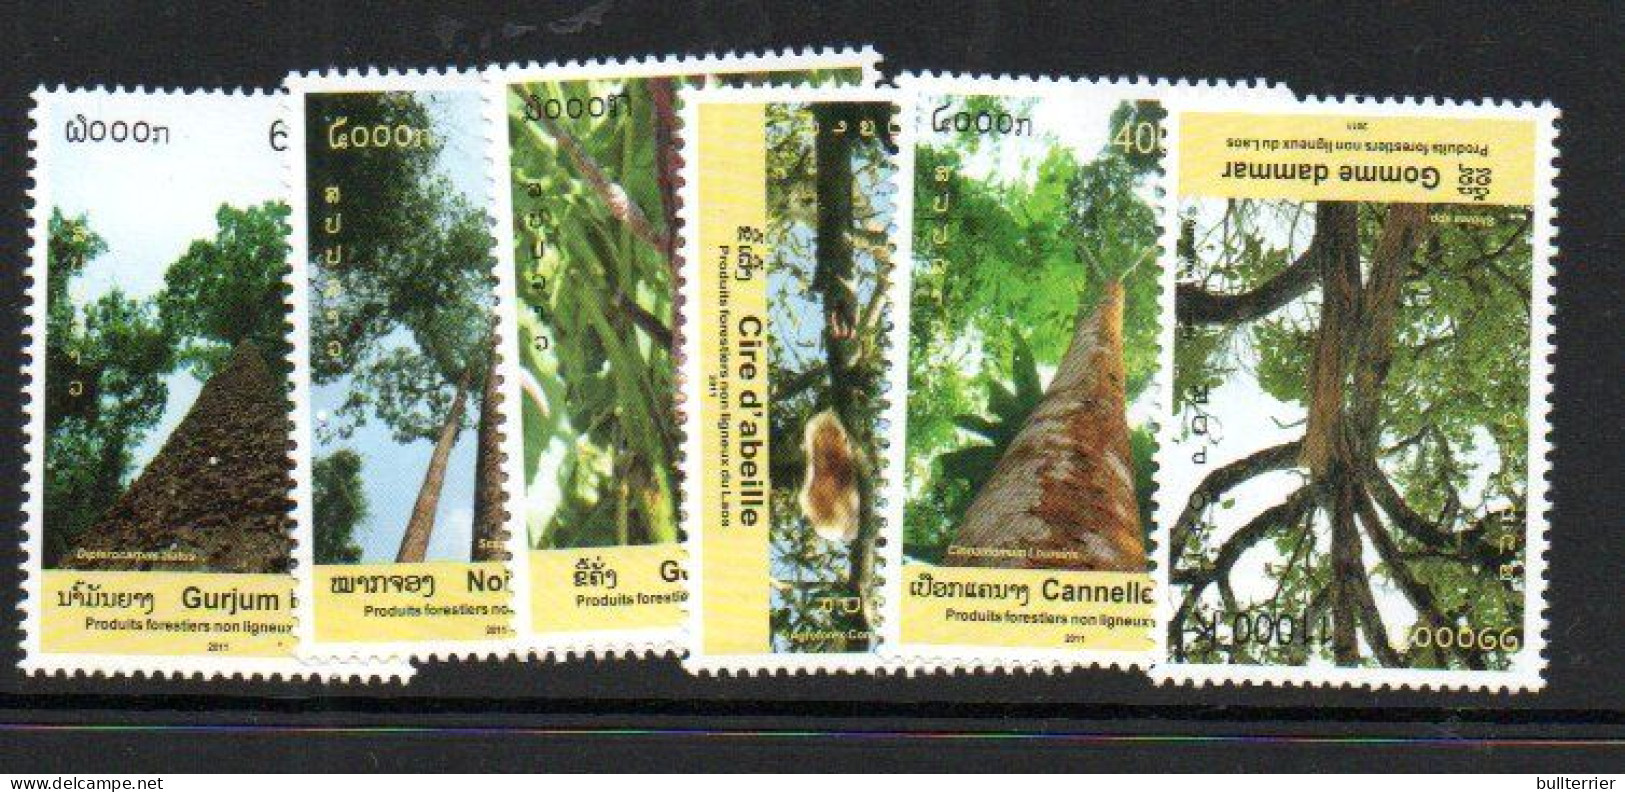 LAOS - 2011 - YEAR OF THE FORESTS SET OF 5  MINT NEVER HINGED - Laos